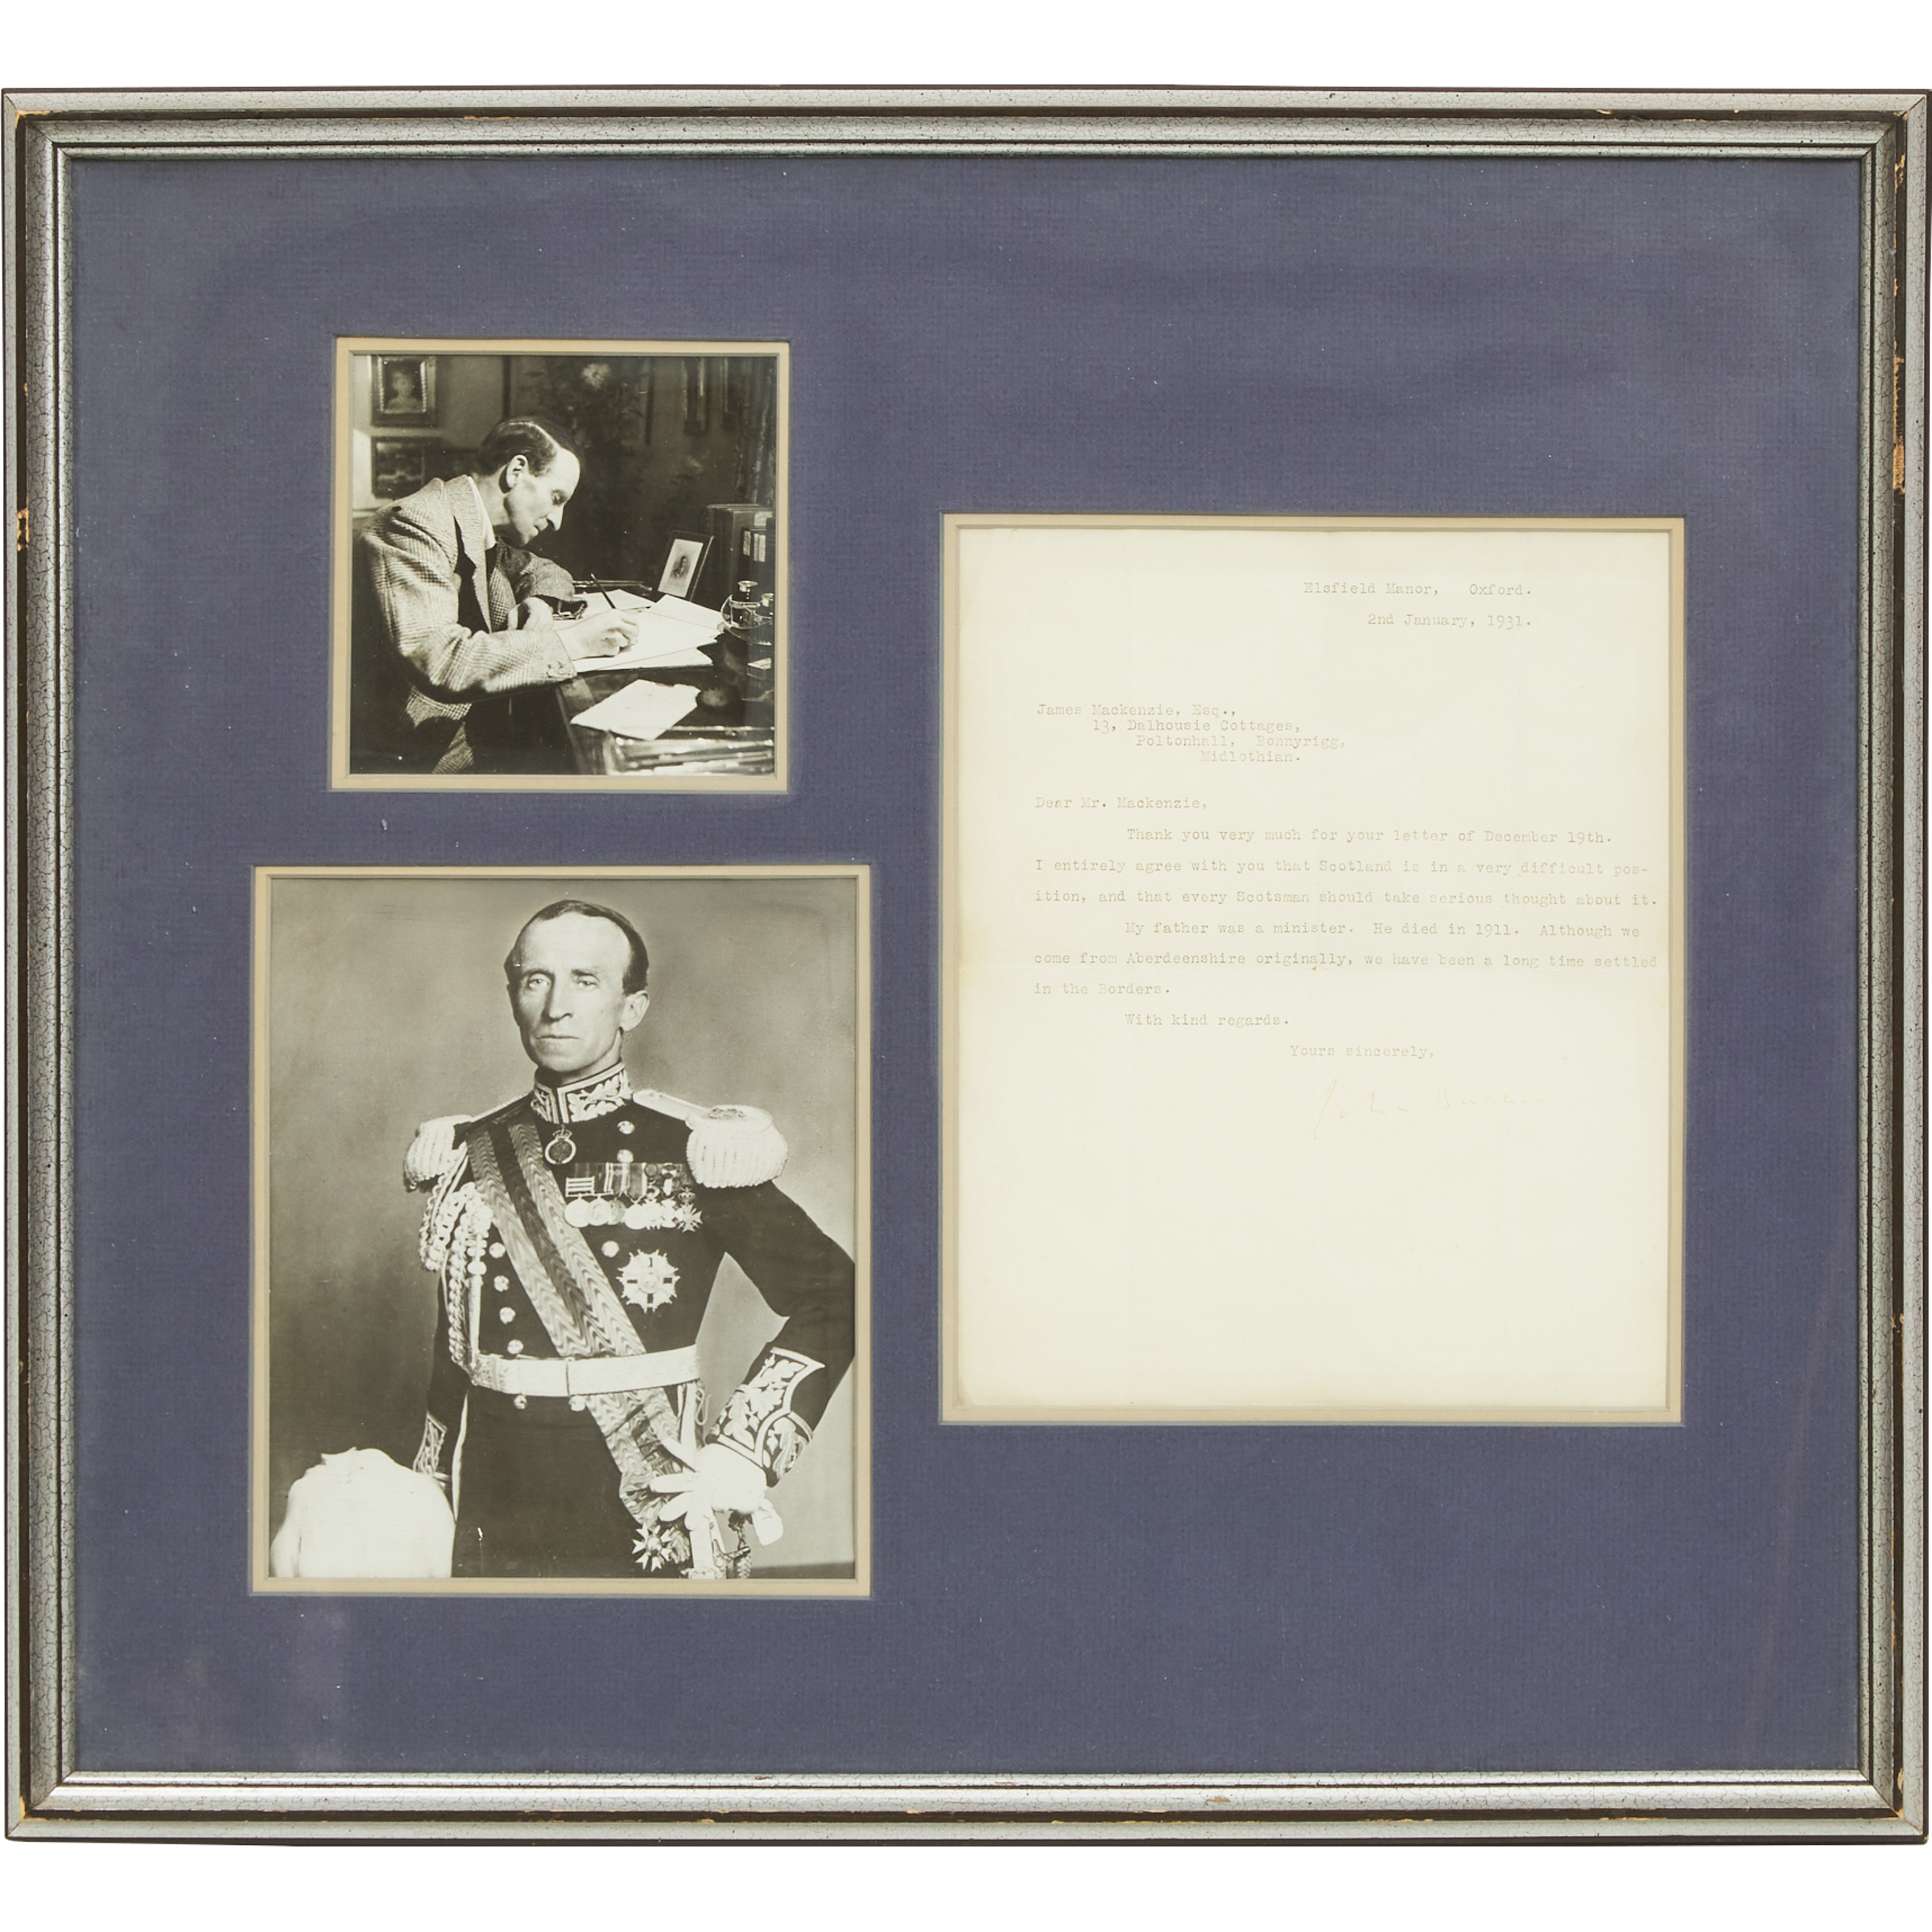 John Buchan, 1st Baron Tweedsmuir Signed Letter and Two Photographs, 1931